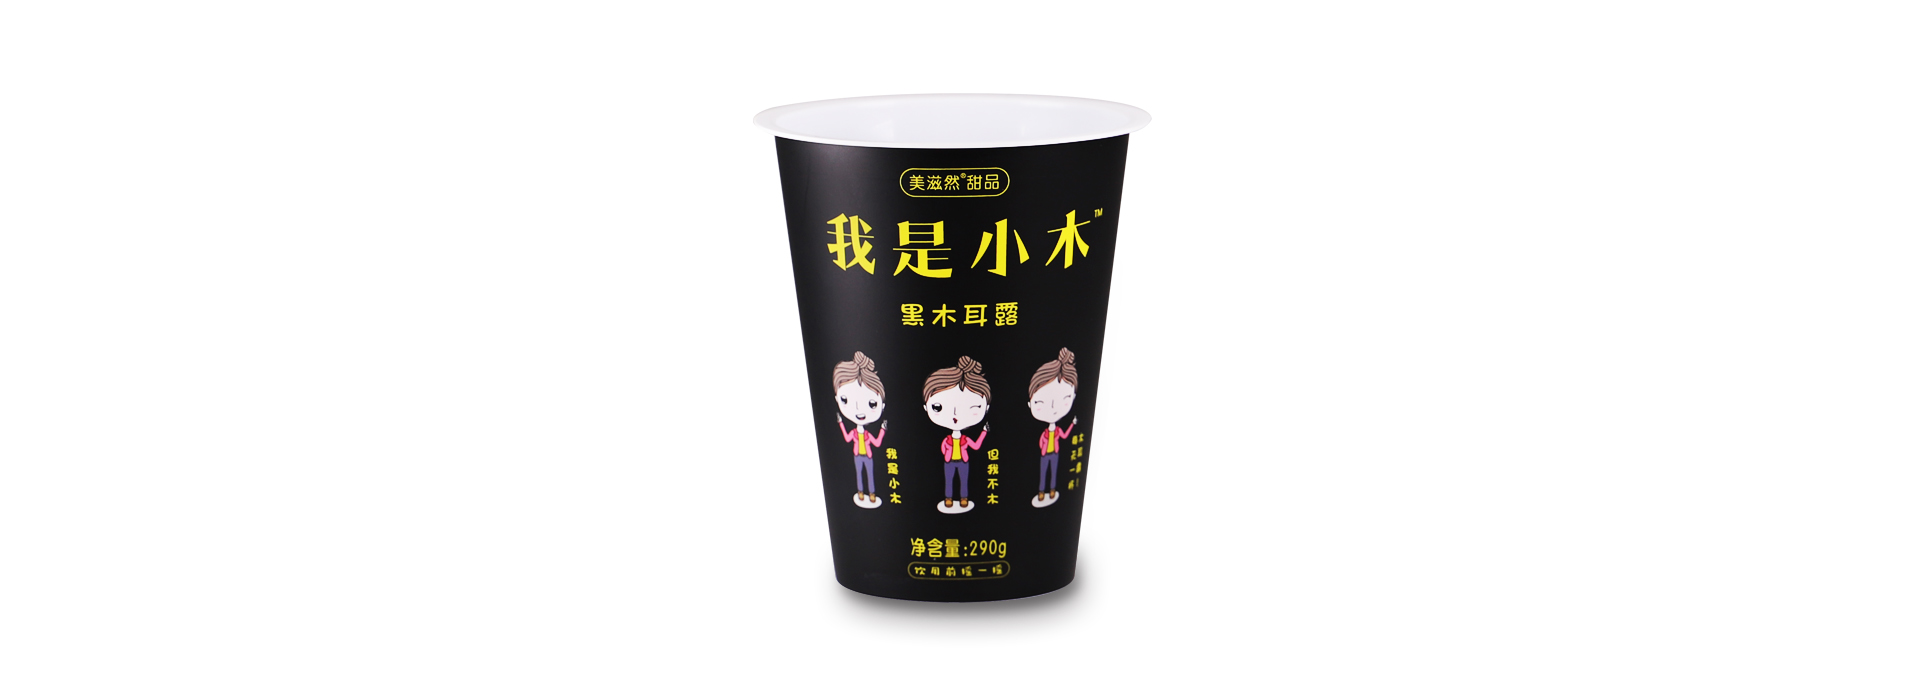 260ml(200g) Drinking Cup